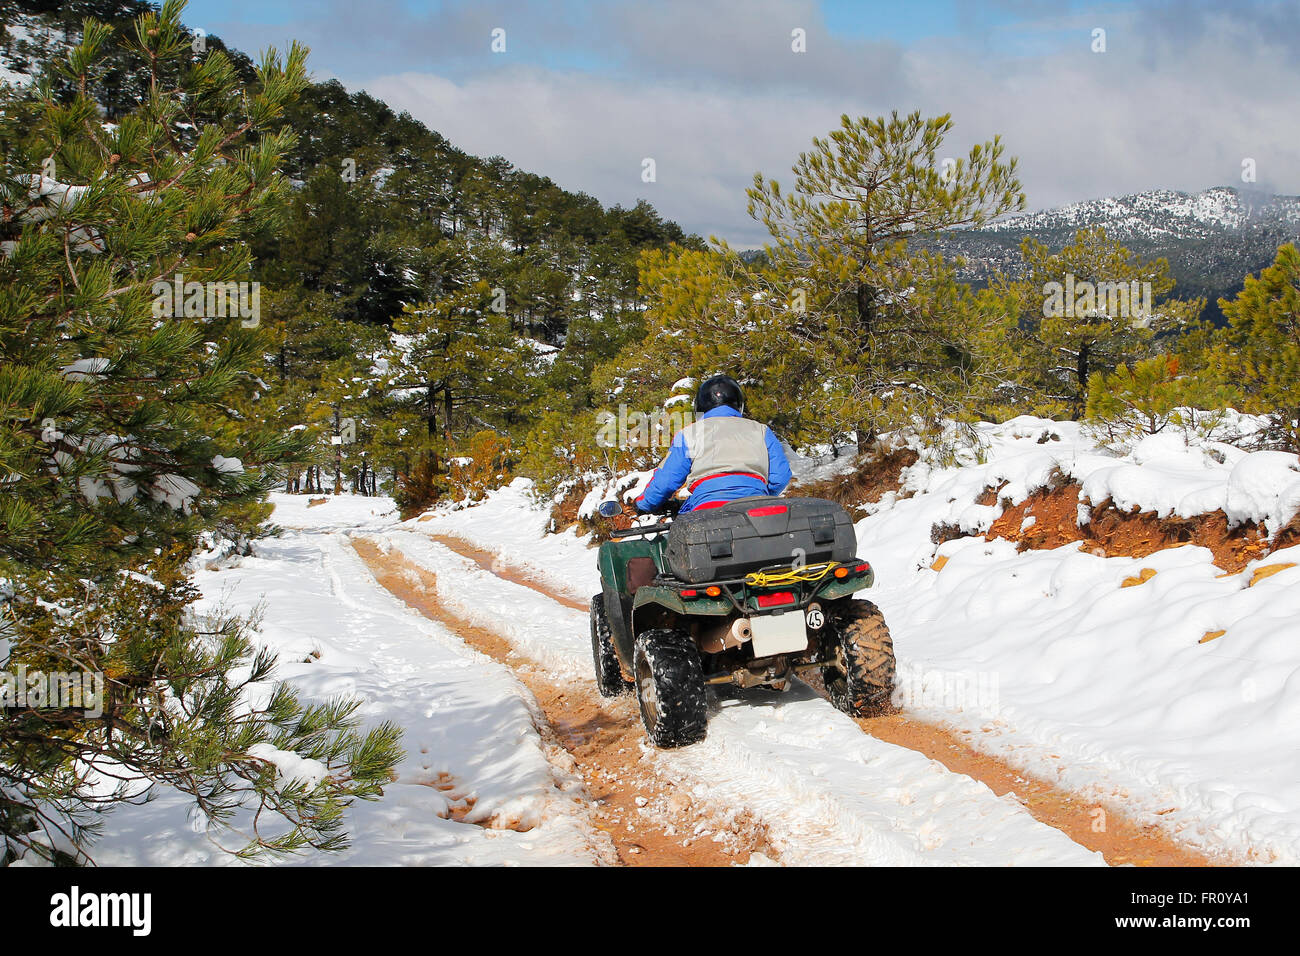 Quad riding in the forest at winter, with snow Stock Photo